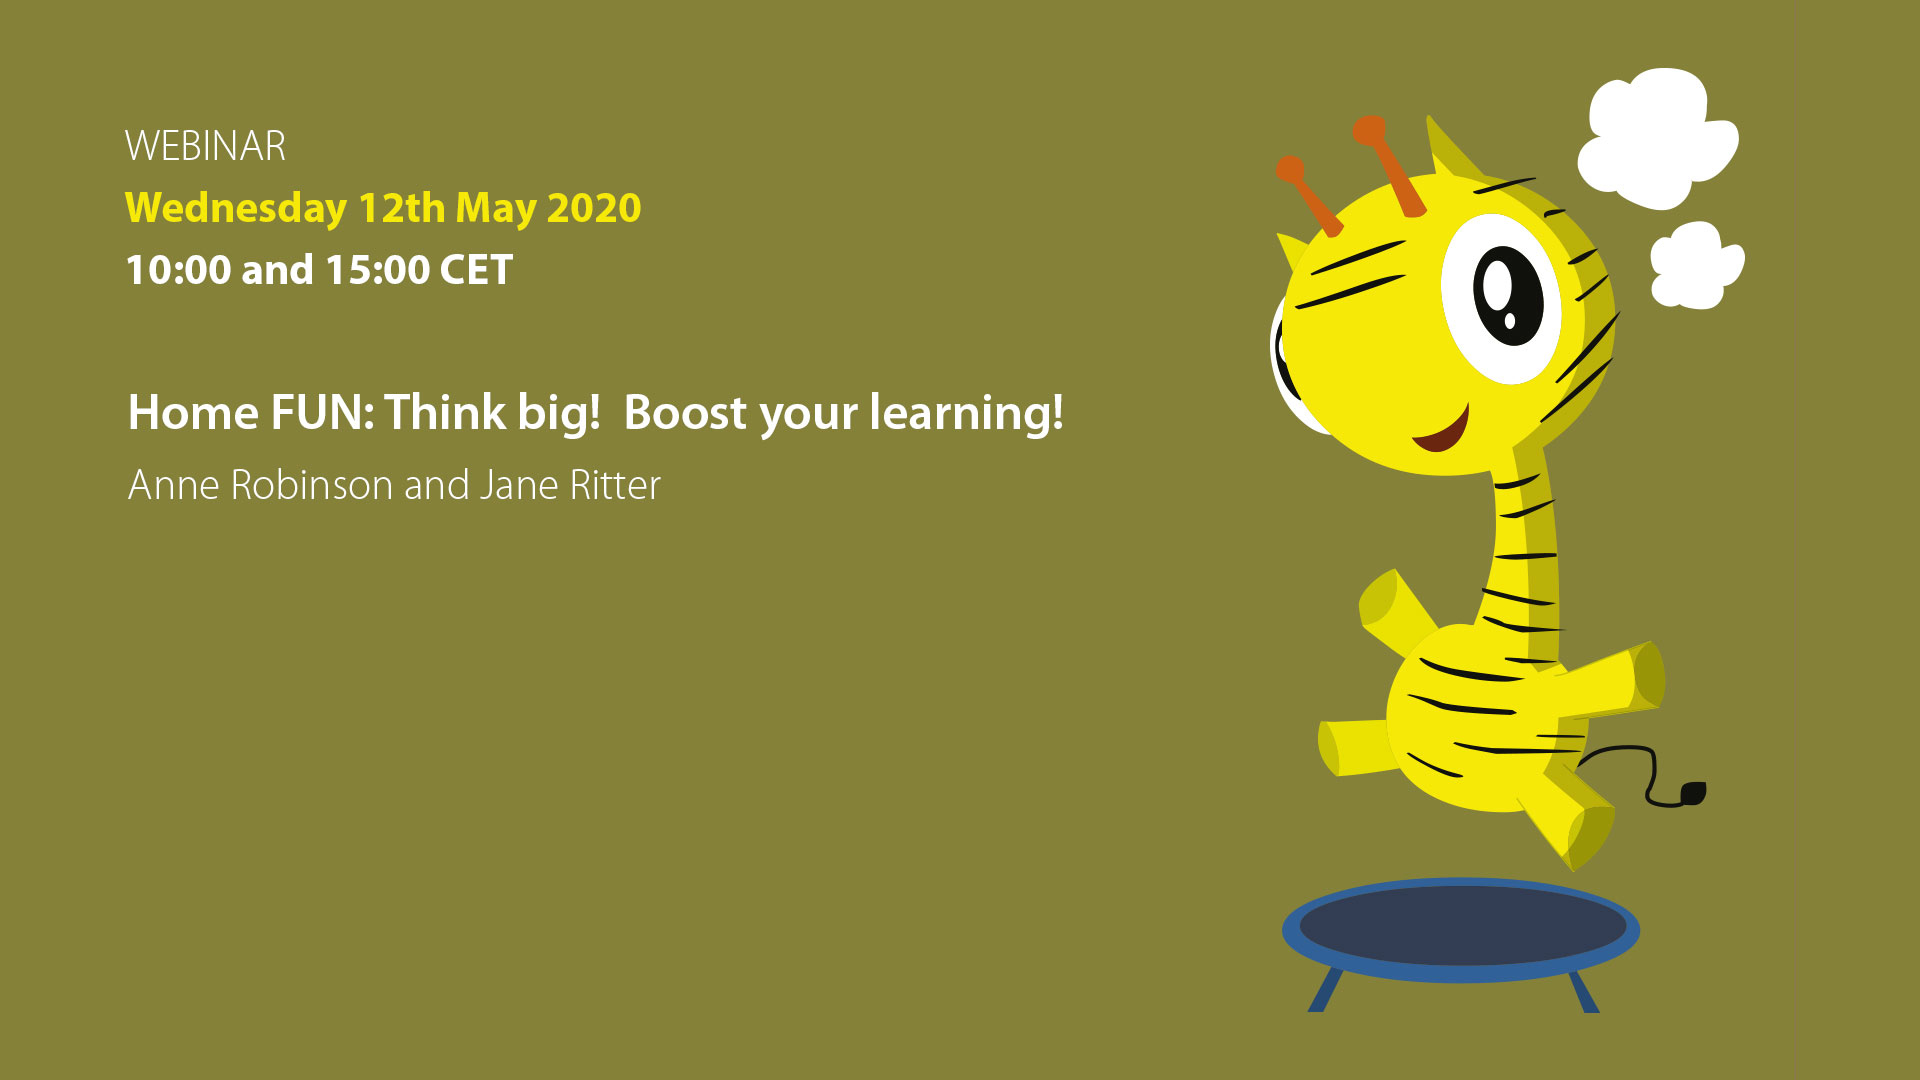 Home FUN: Think big!  Boost your learning! – with Anne Robinson & Jane Ritter